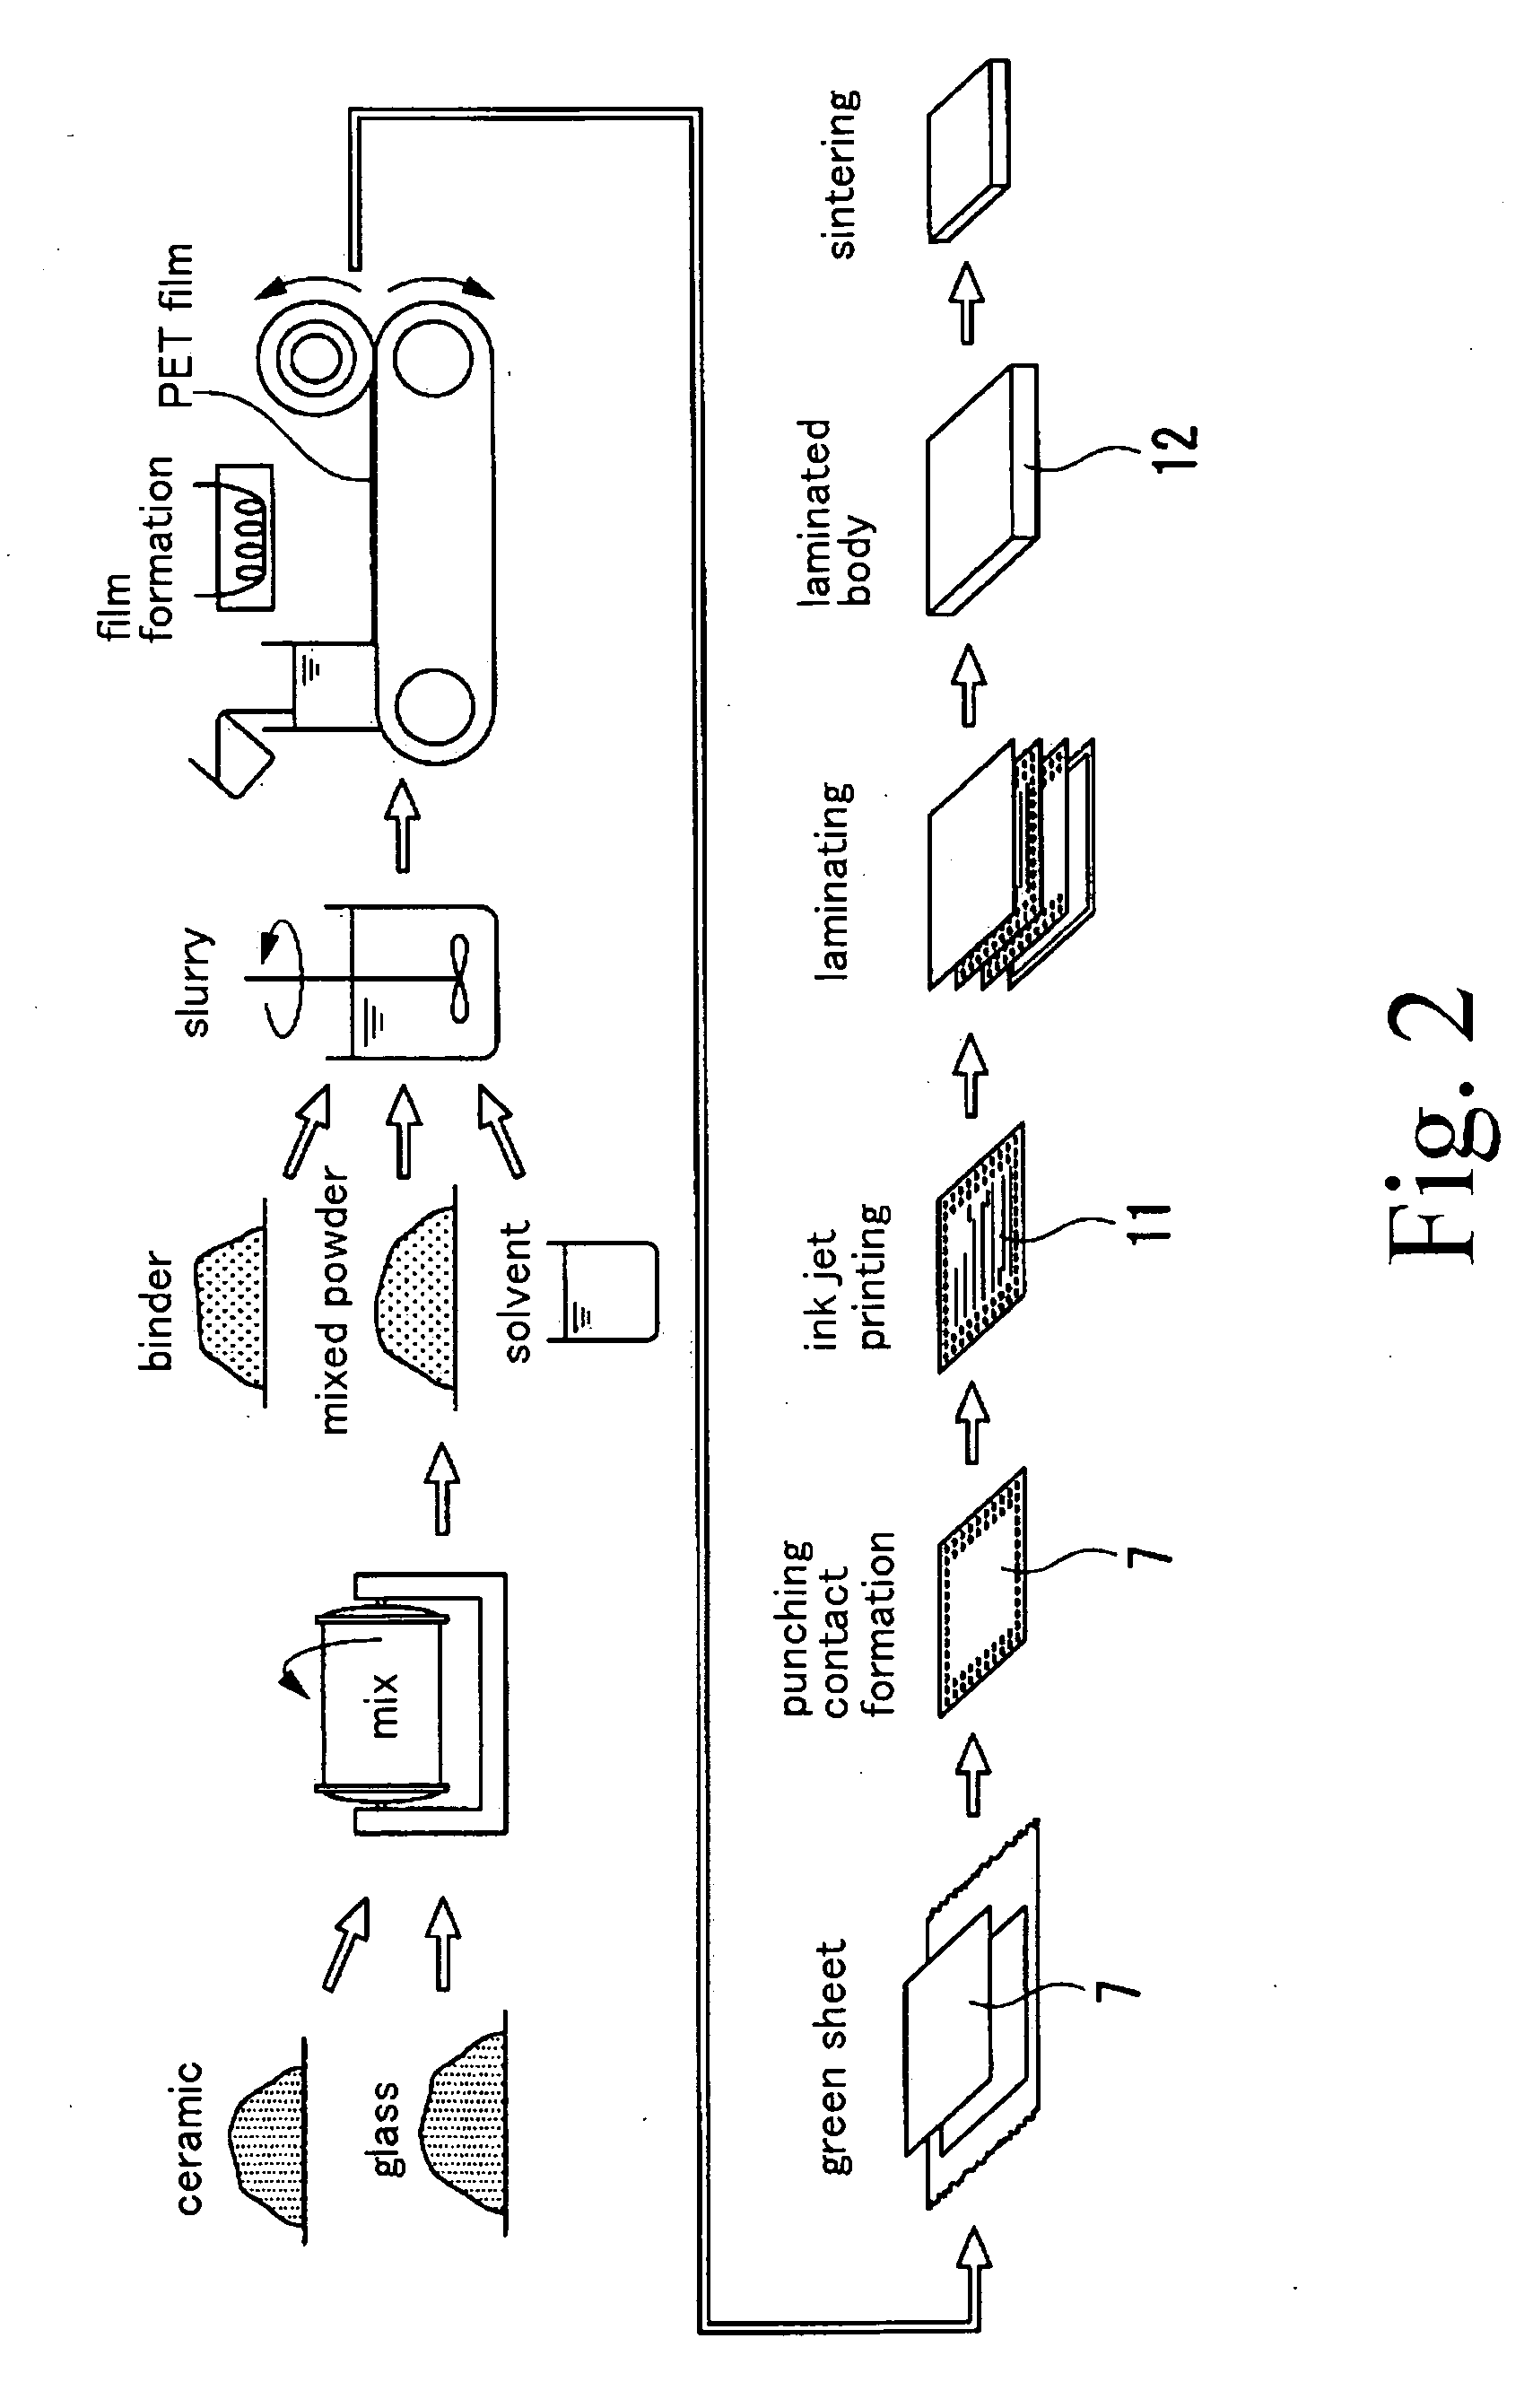 Conductive pattern formation ink, conductive pattern and wiring substrate